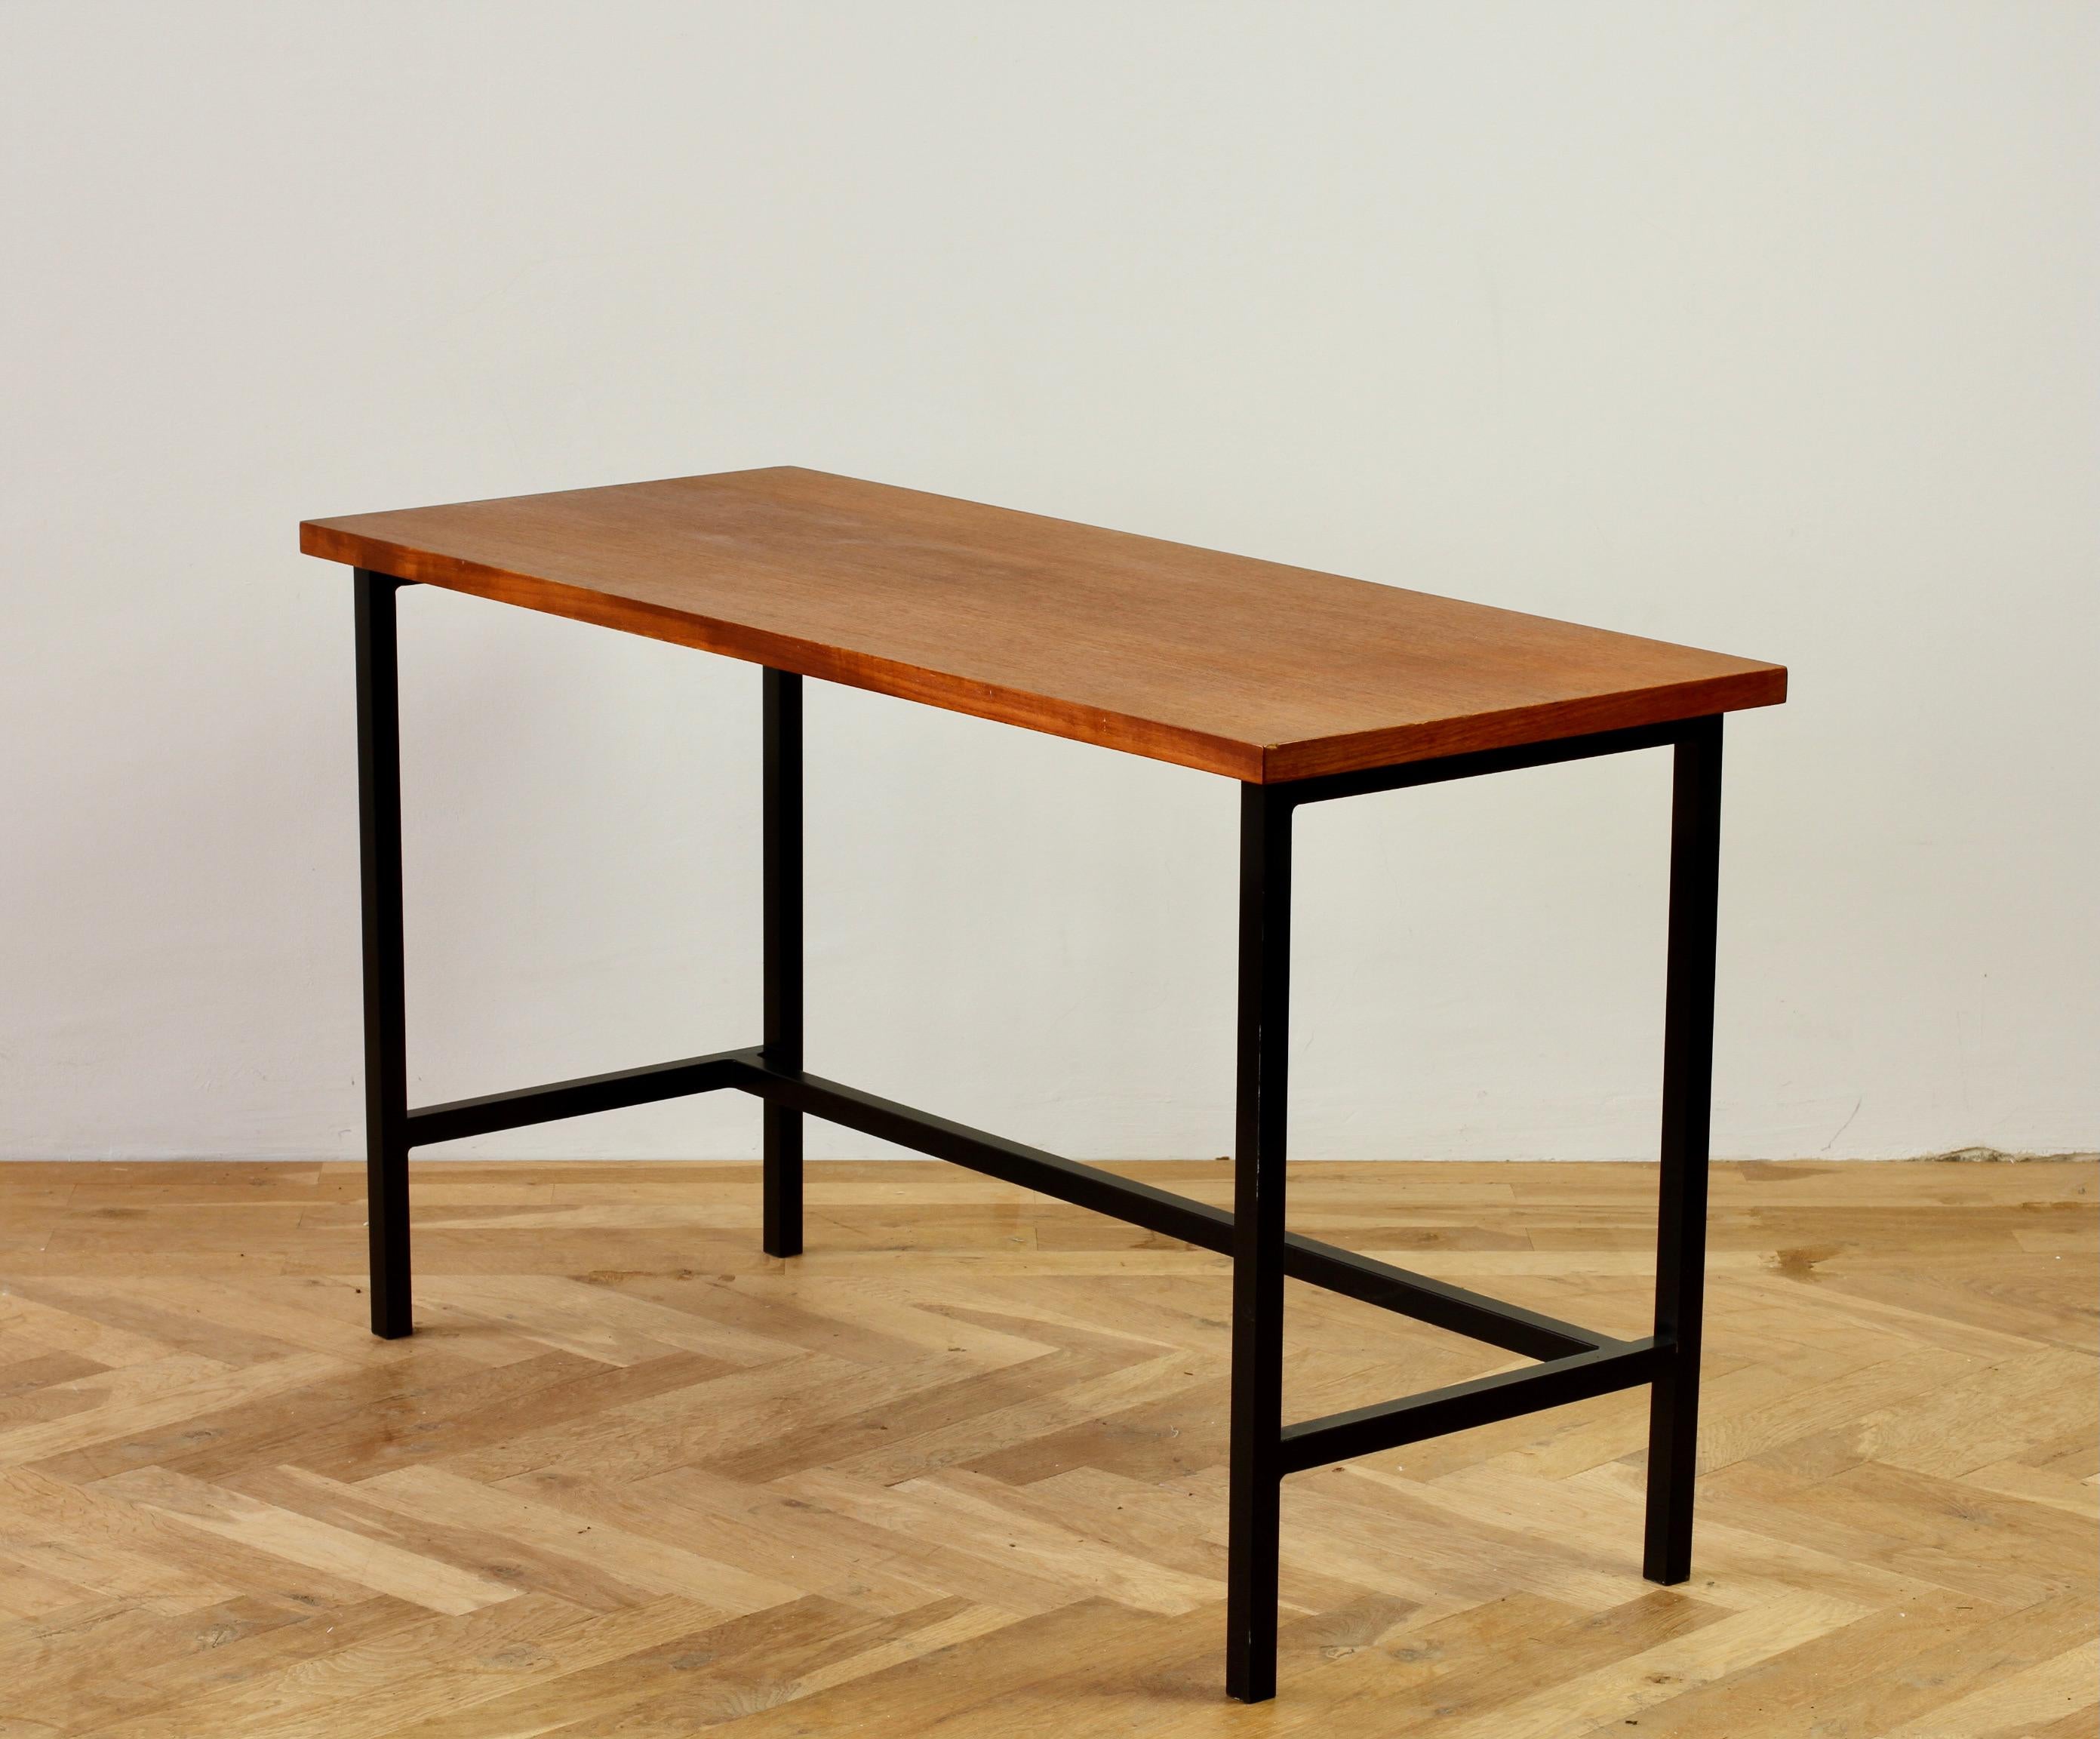 Florence Knoll 1950s Mid-Century Wood Veneer Black Frame Desk or Console Table For Sale 2